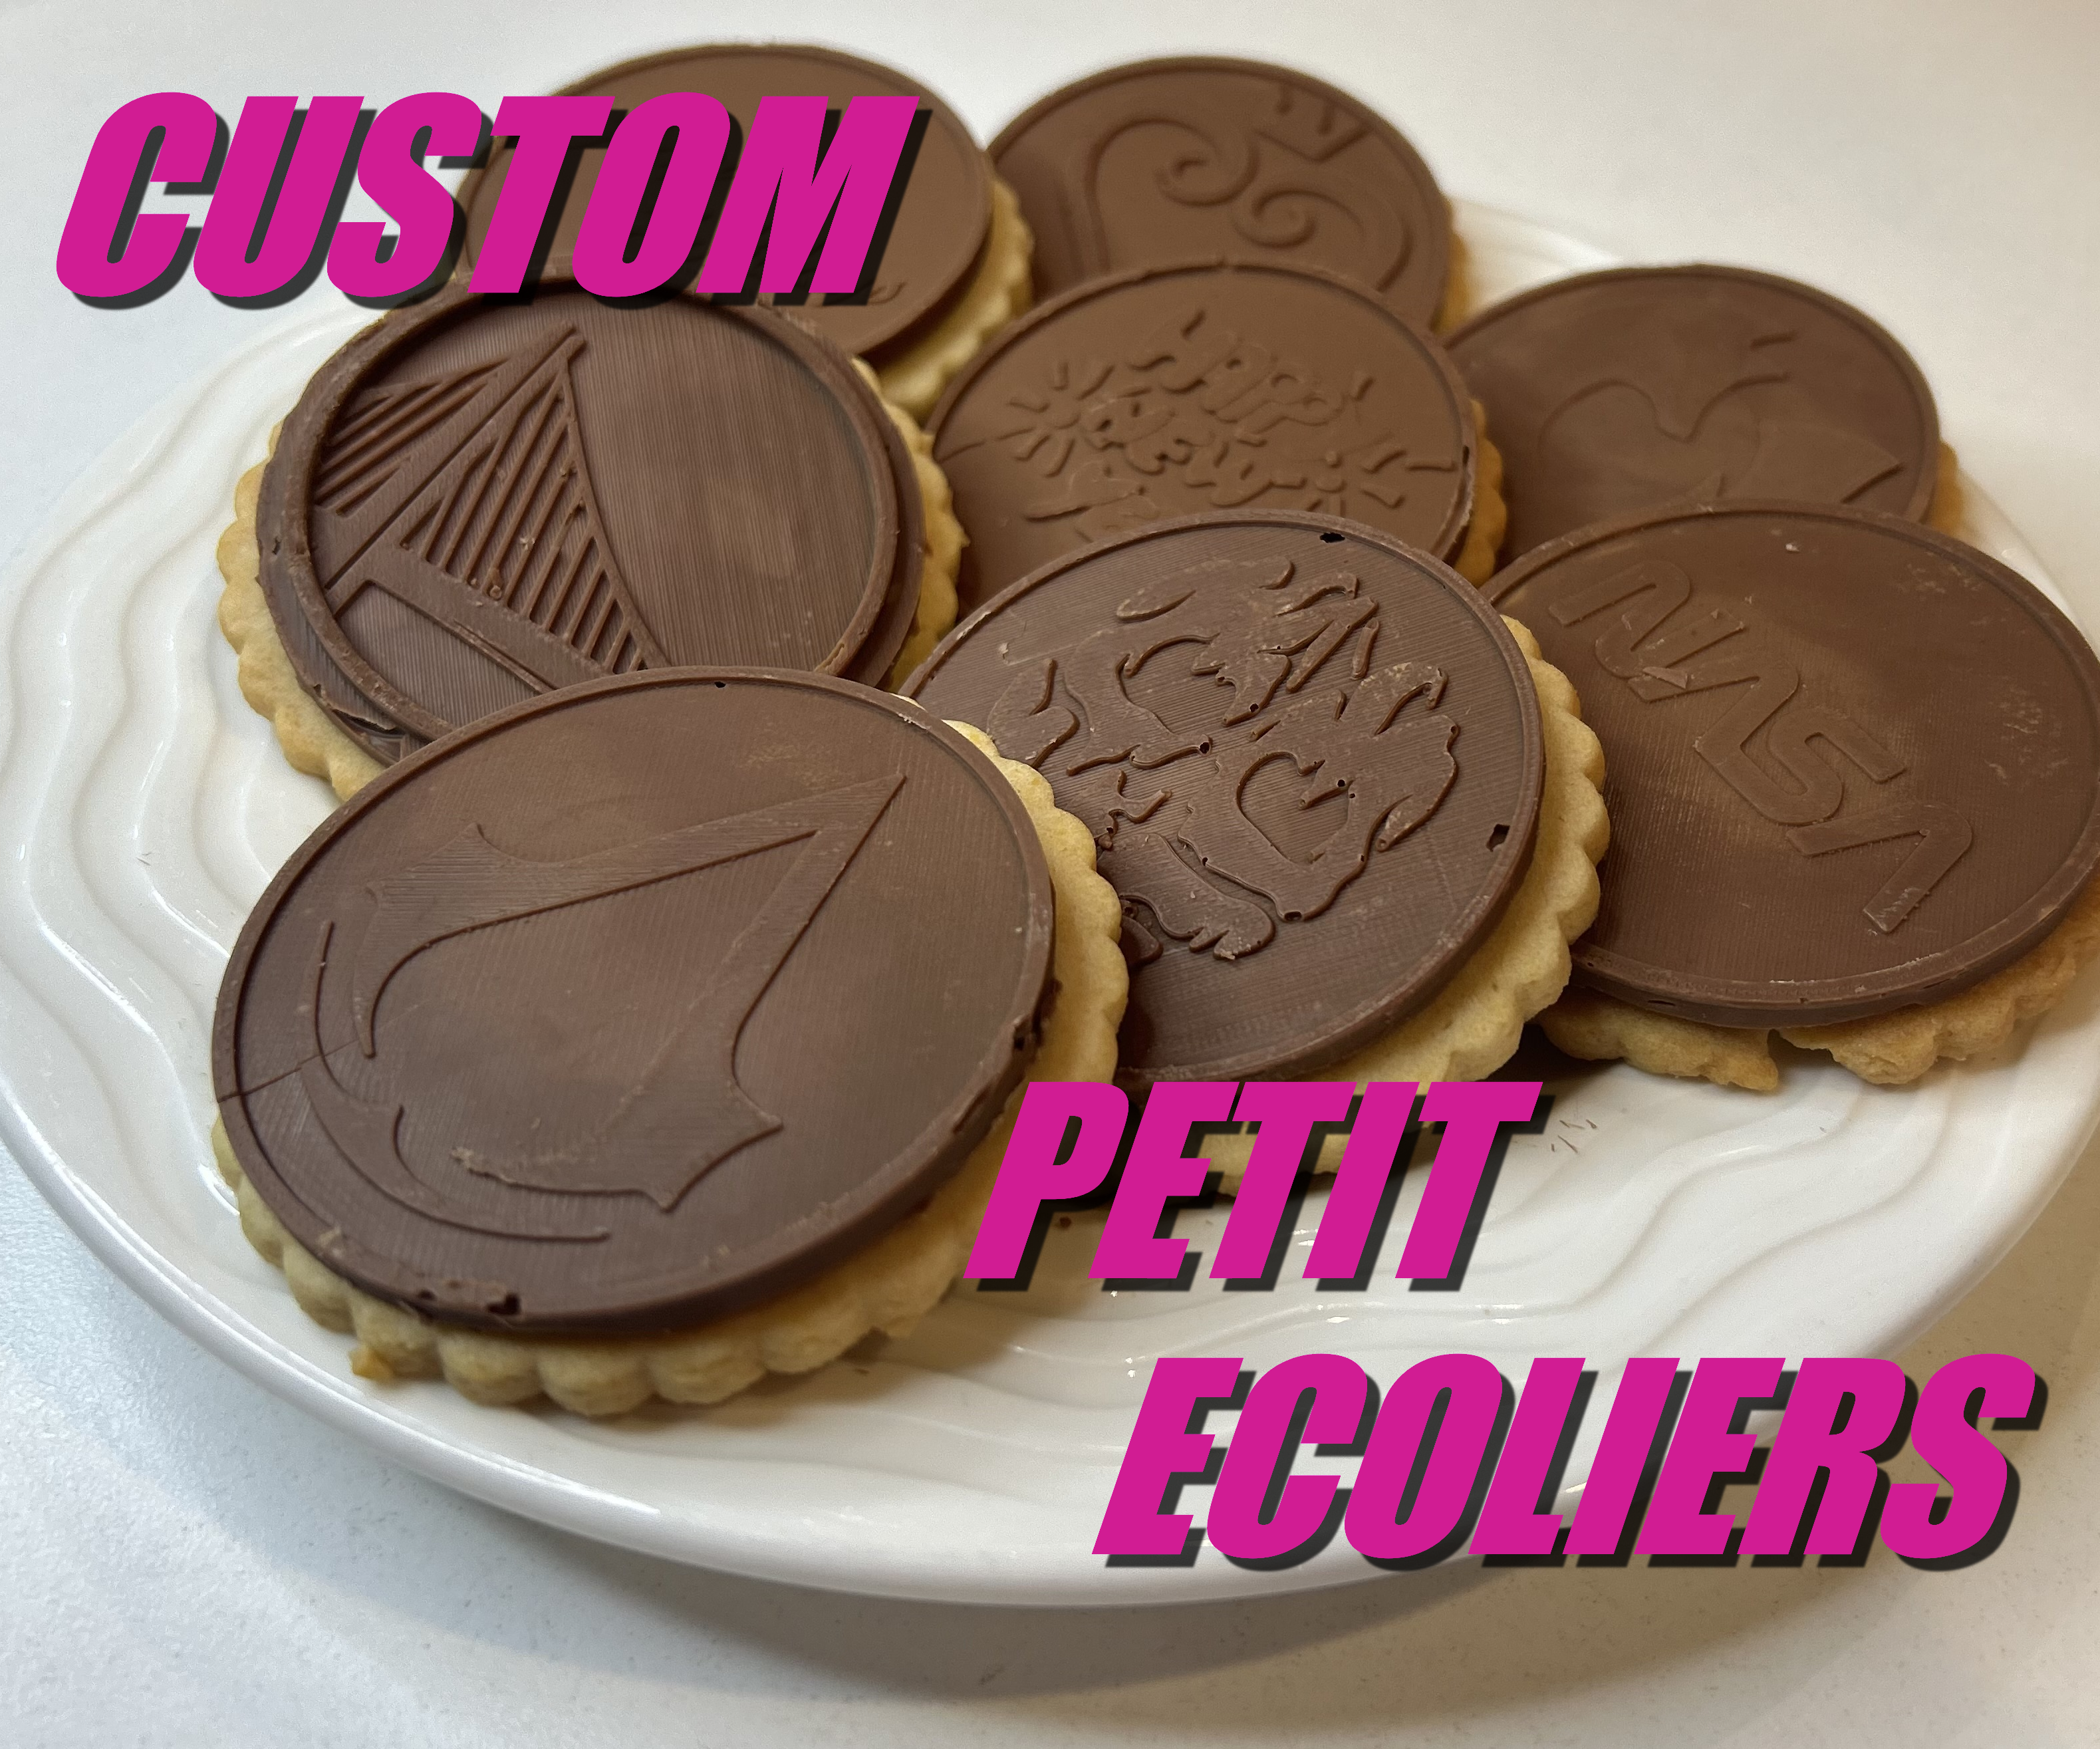 Custom Chocolate Cookies, Using Silicon, 3D Printing, Fusion 360 and Chocolate